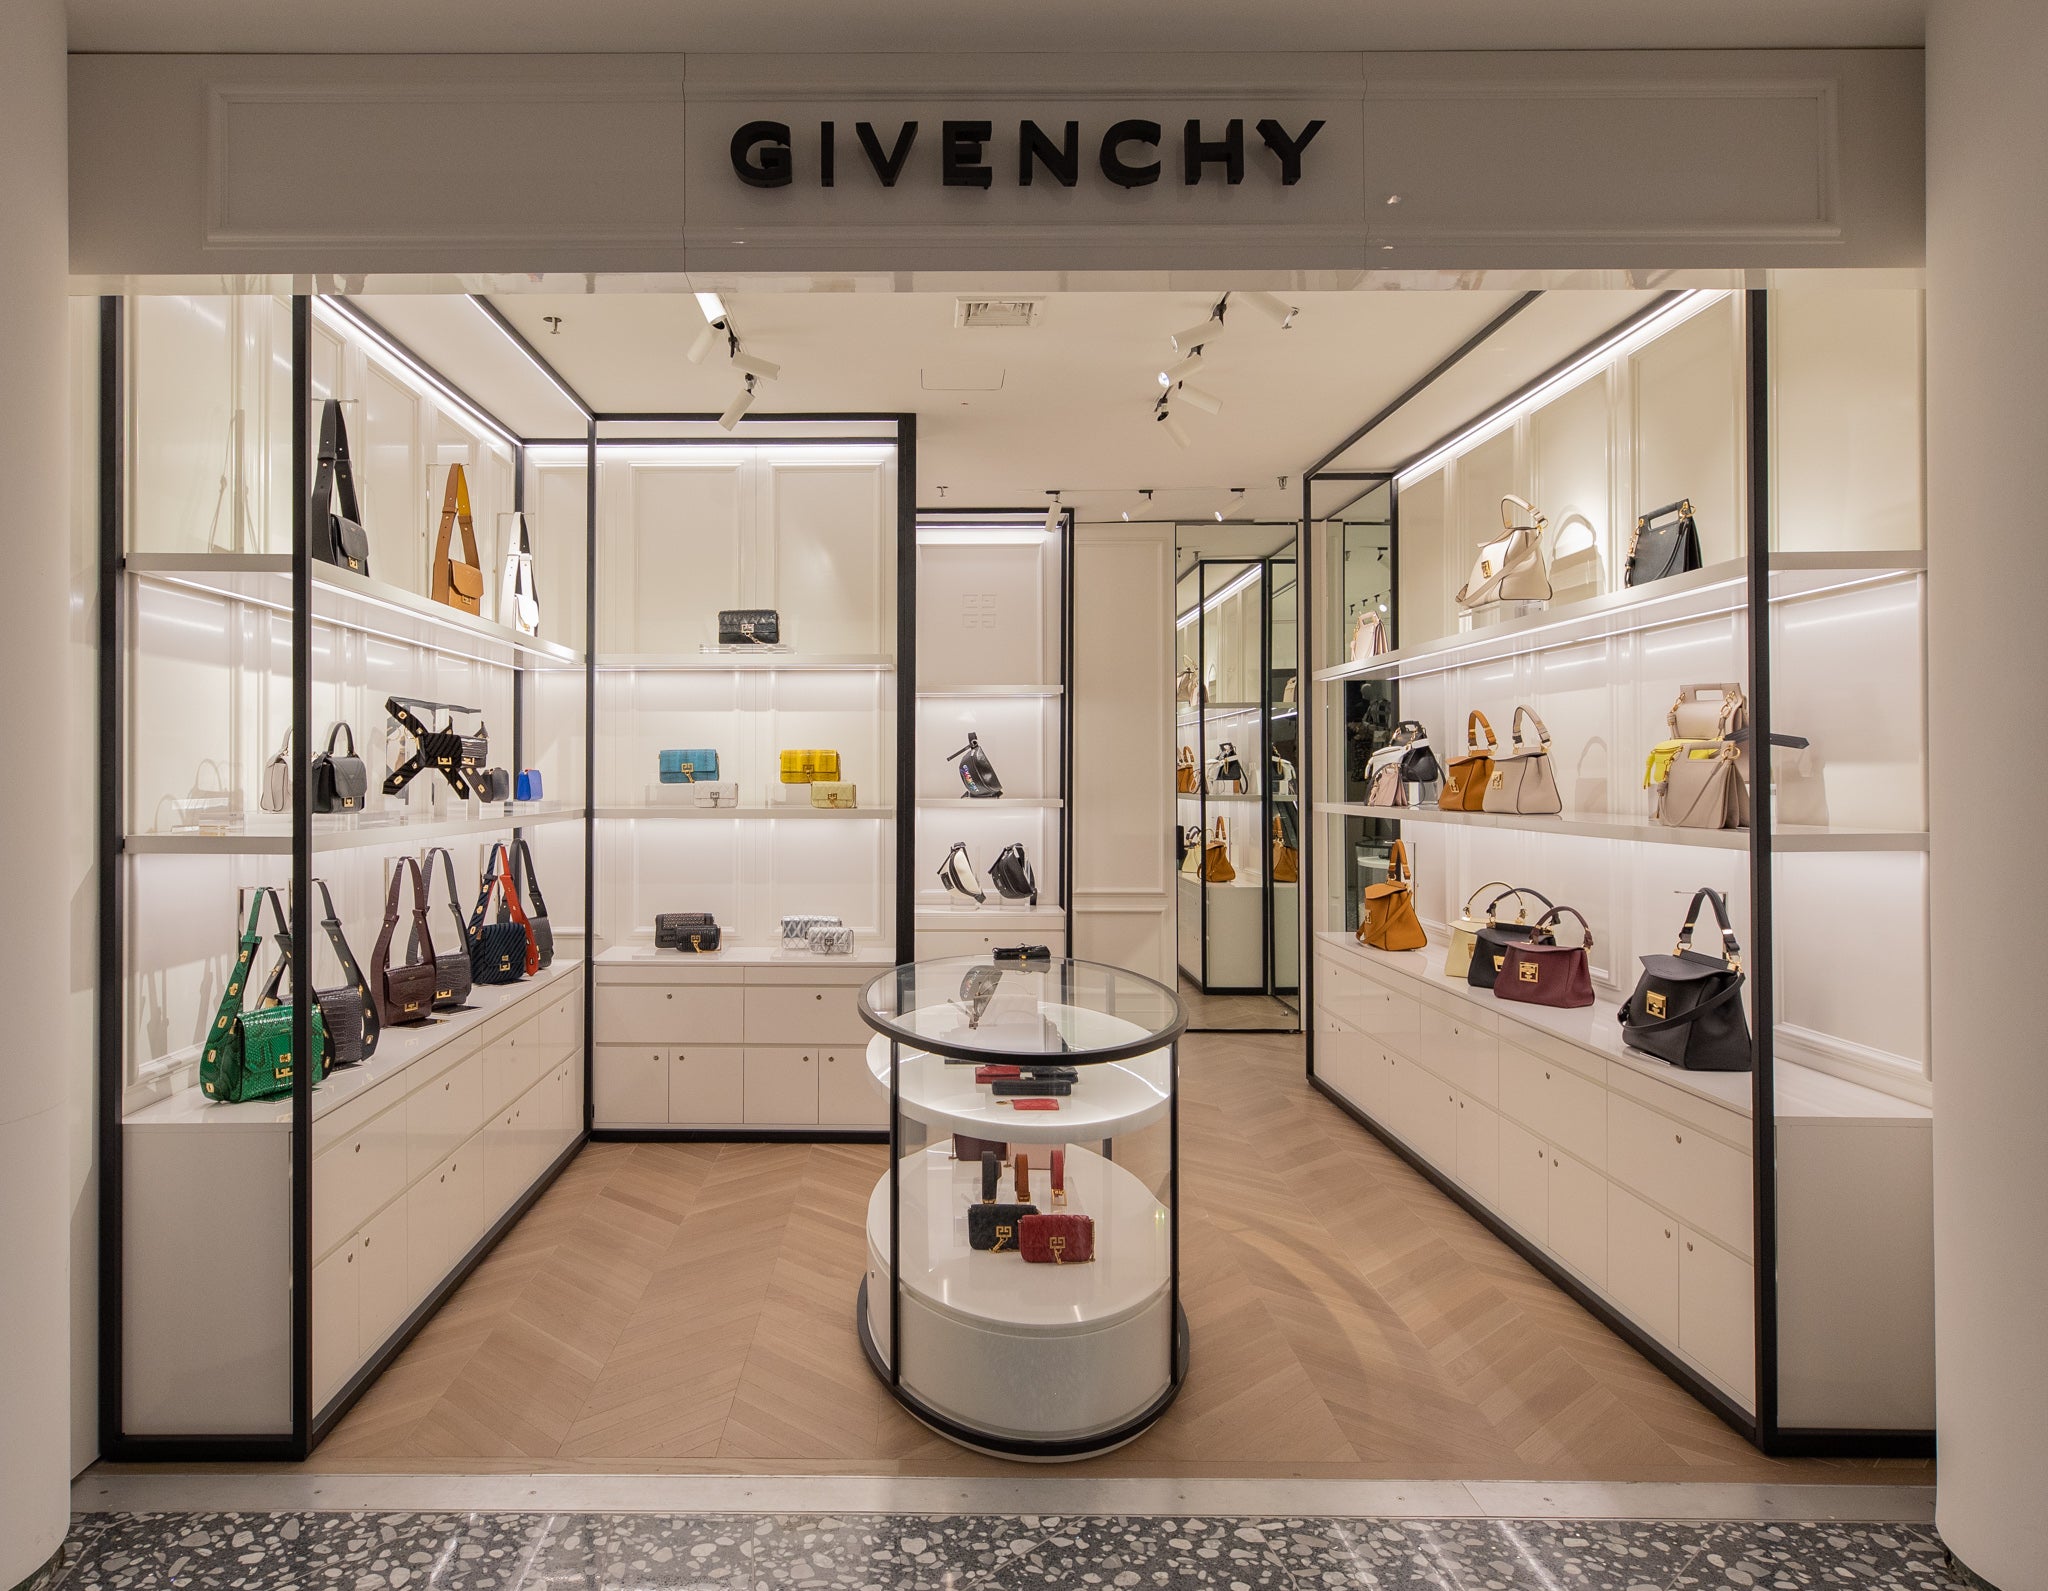 Givenchy - Store adress is: Ground Floor, Pacific Fair 2778A